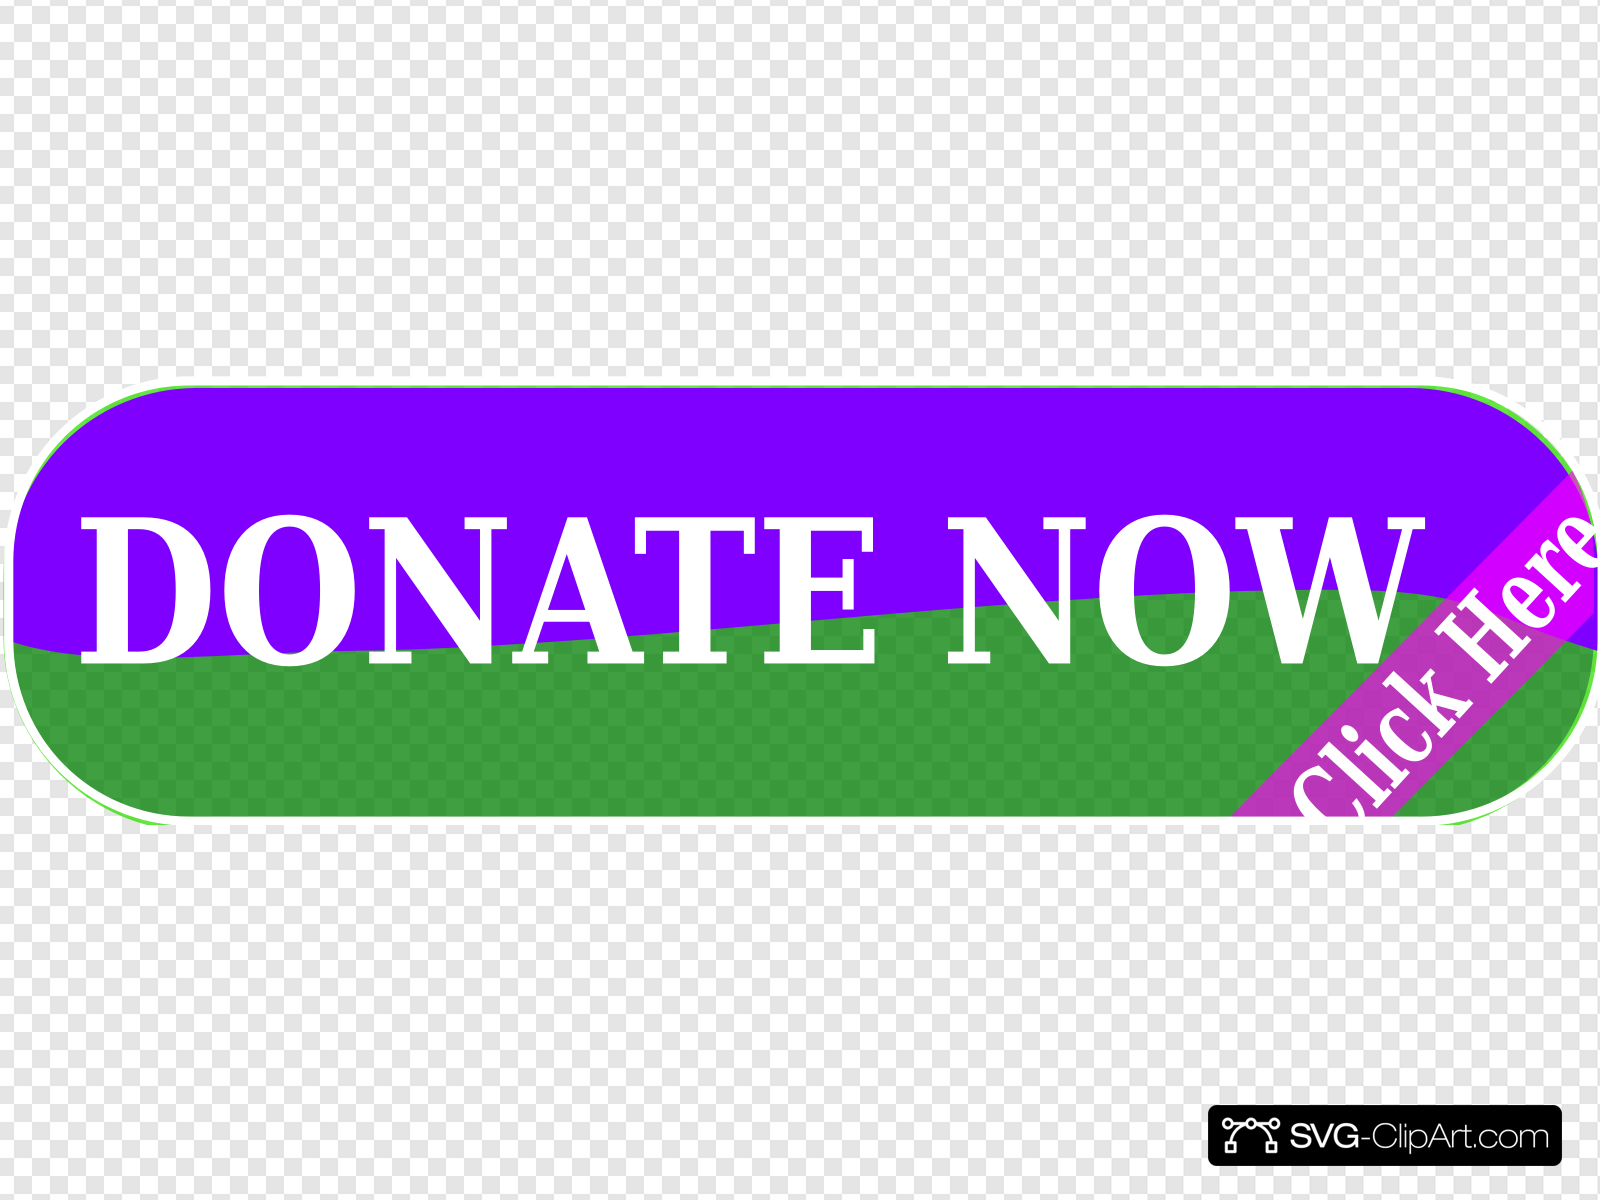 Donate Now Clip art, Icon and SVG.